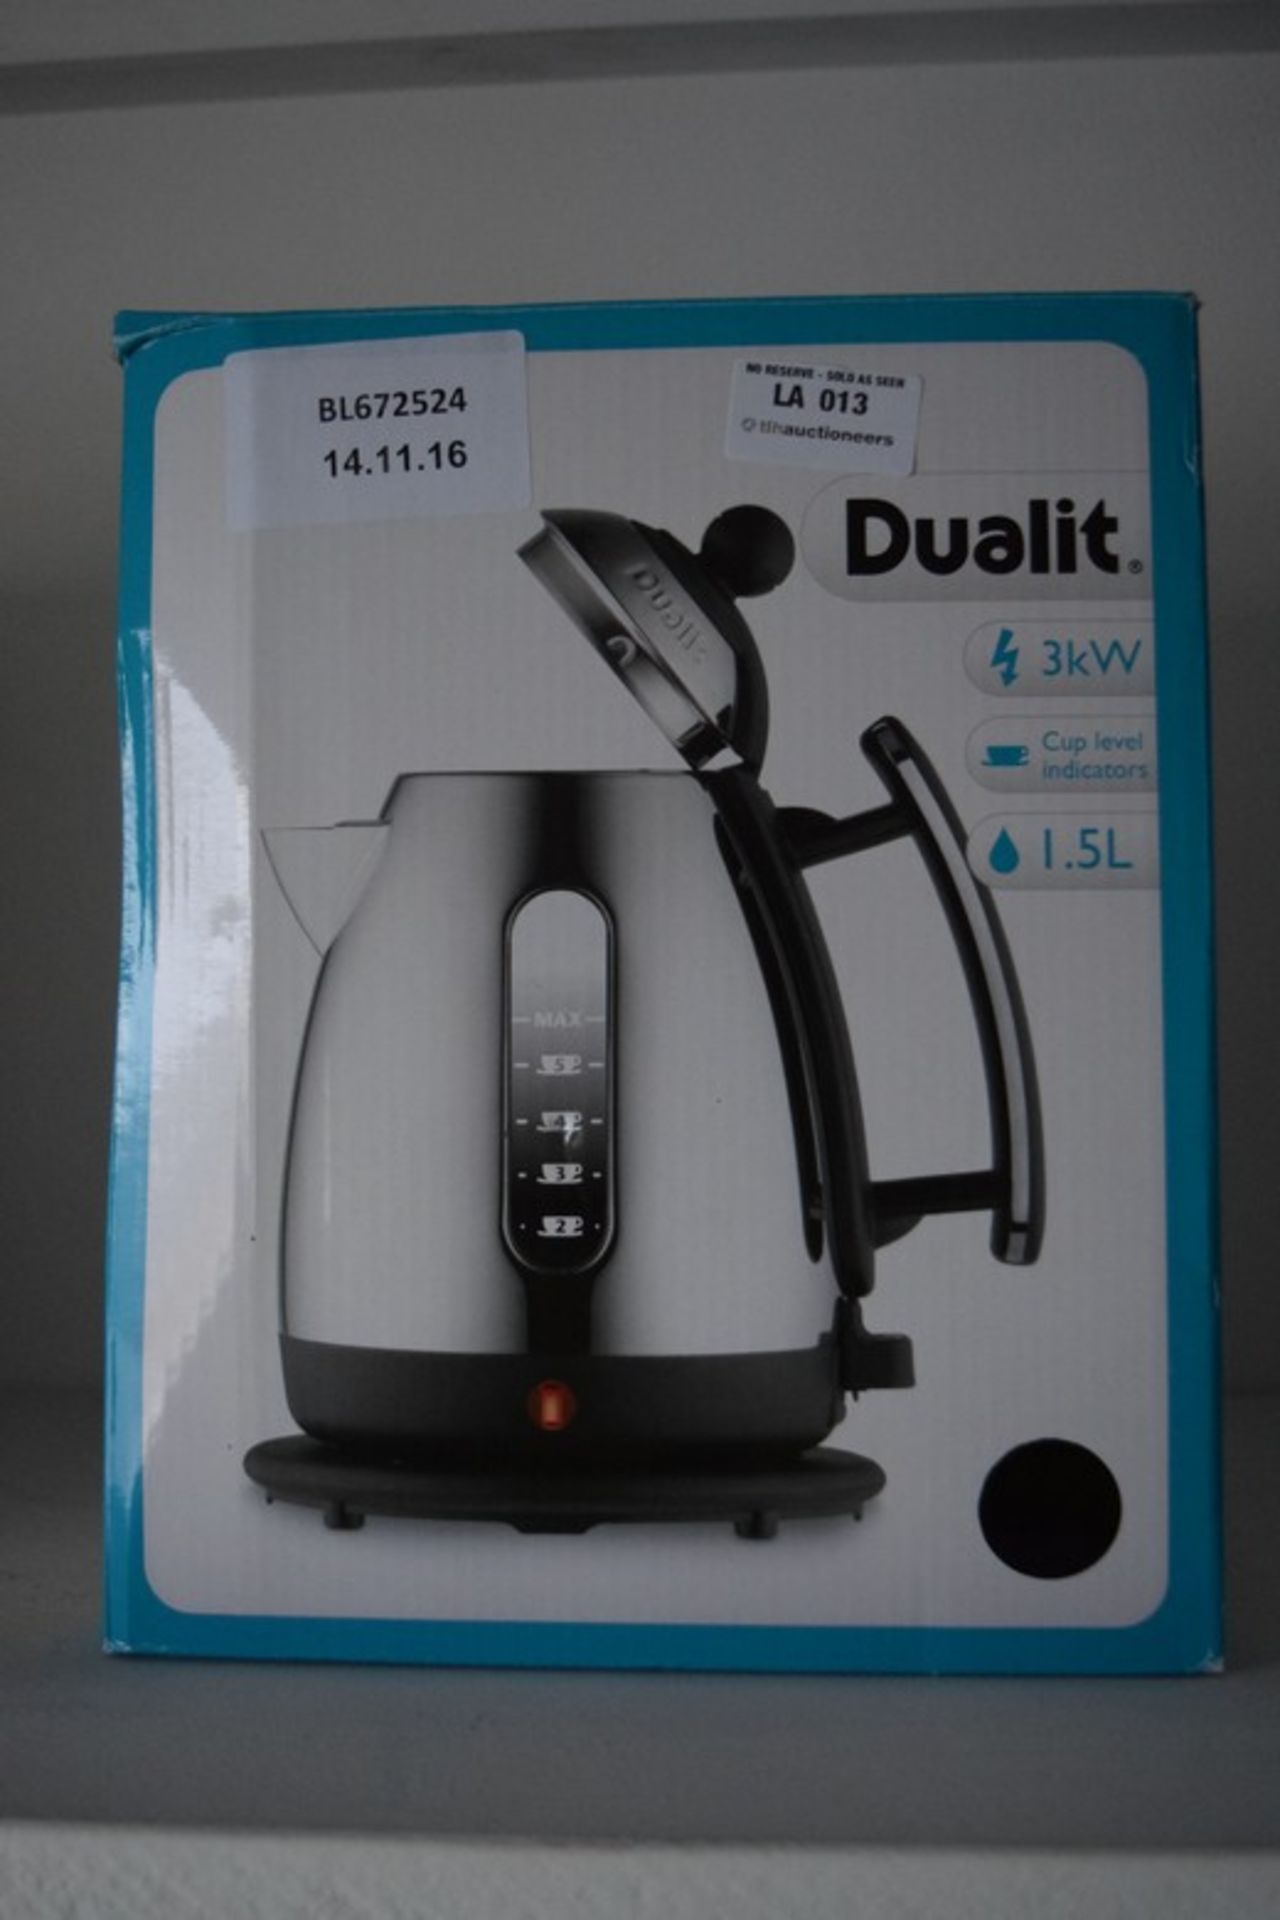 1 x BOXED DUALIT CLASSIC 1.5L KETTLE RRP £65 (14.11.2016) *PLEASE NOTE THAT THE BID PRICE IS